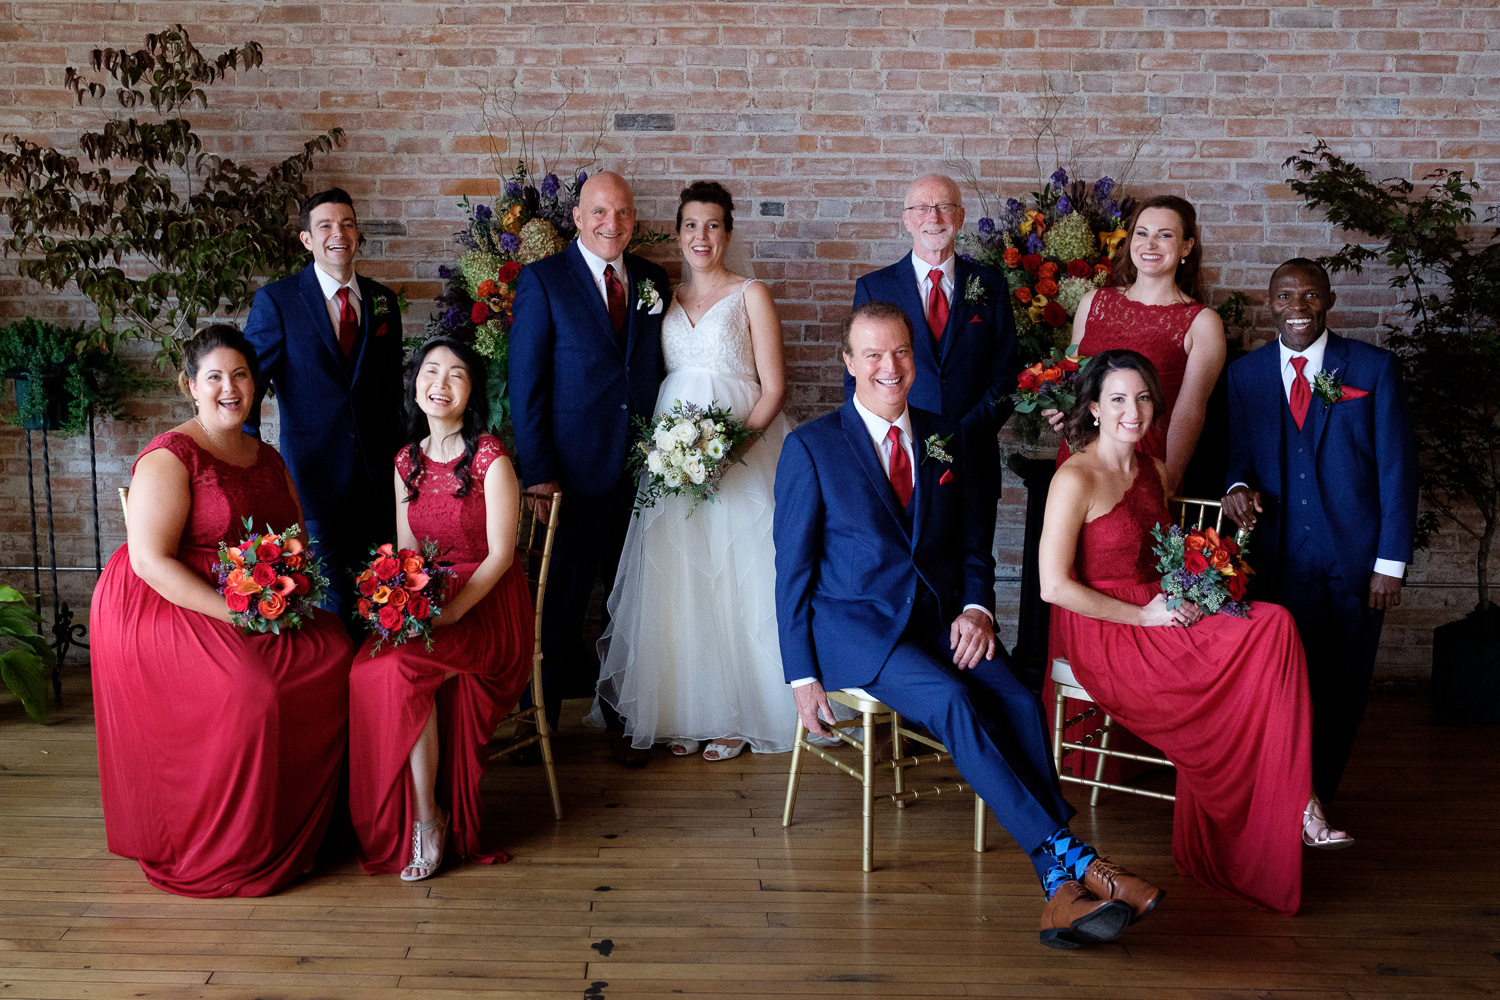  Stephen + Coral pose for a formal portrait with their wedding party at the Dominion Telegraph Event Centre in Paris, Ontario. 